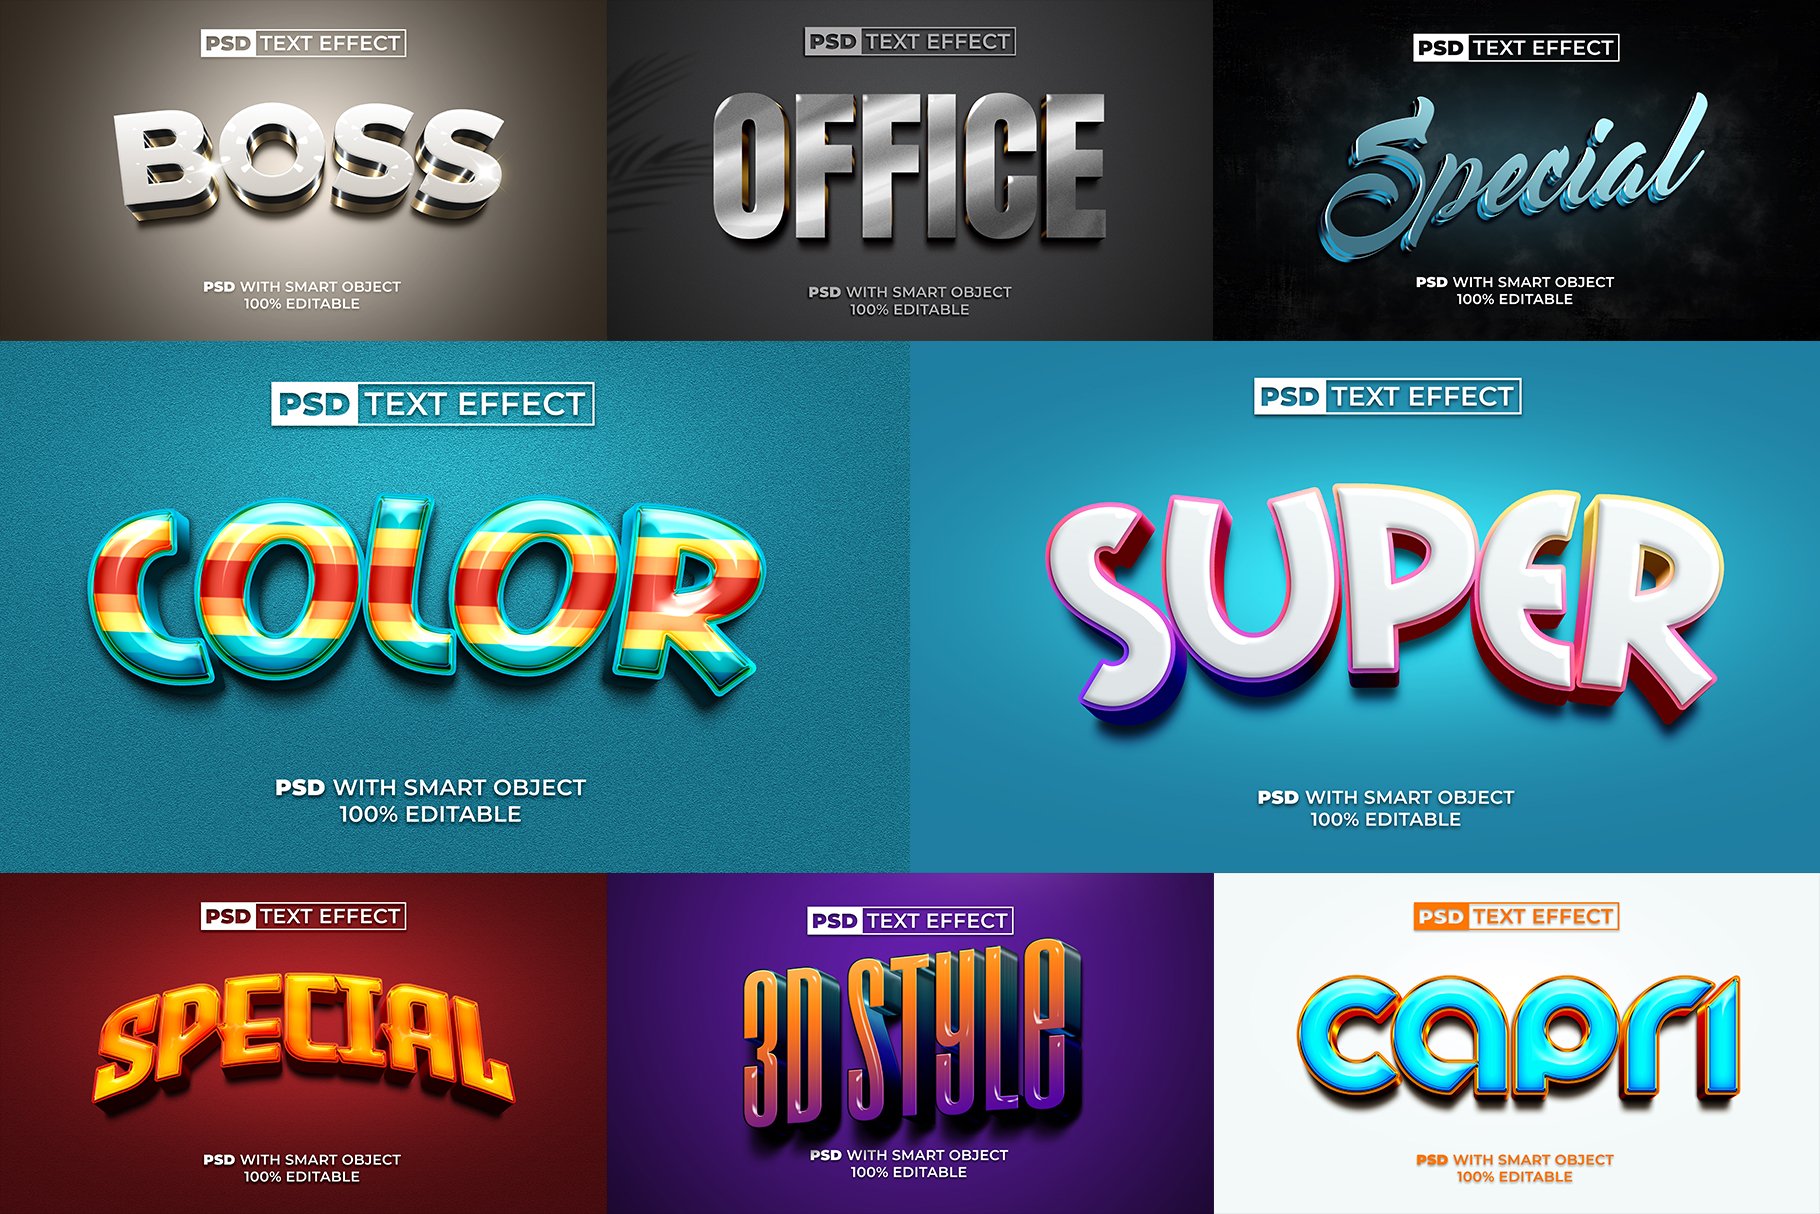 3D Text Effect Style For Photoshop - Design Cuts